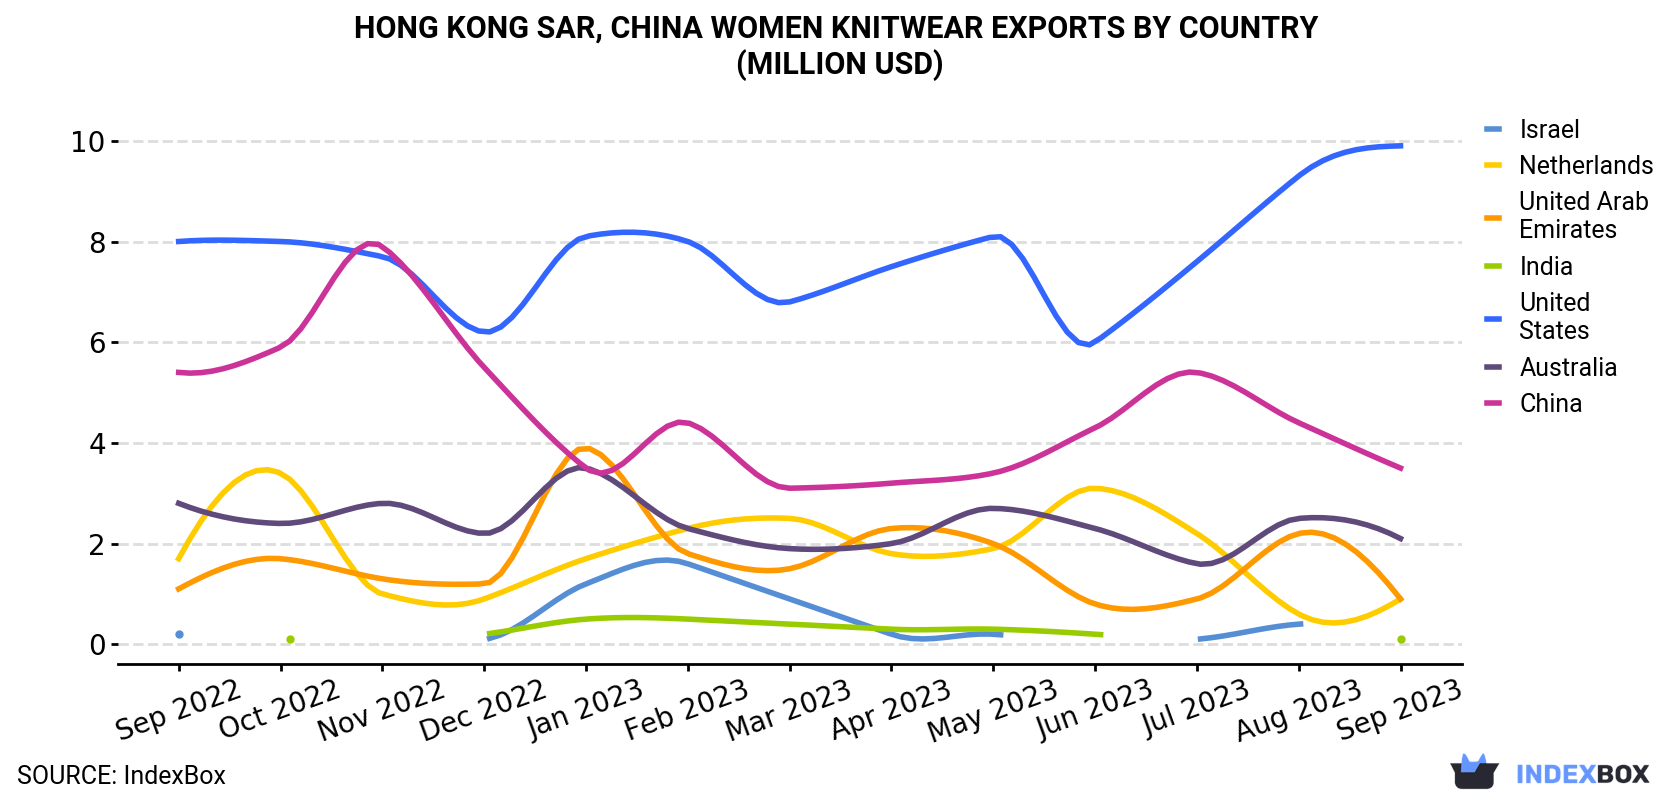 Hong Kong Women Knitwear Exports By Country (Million USD)